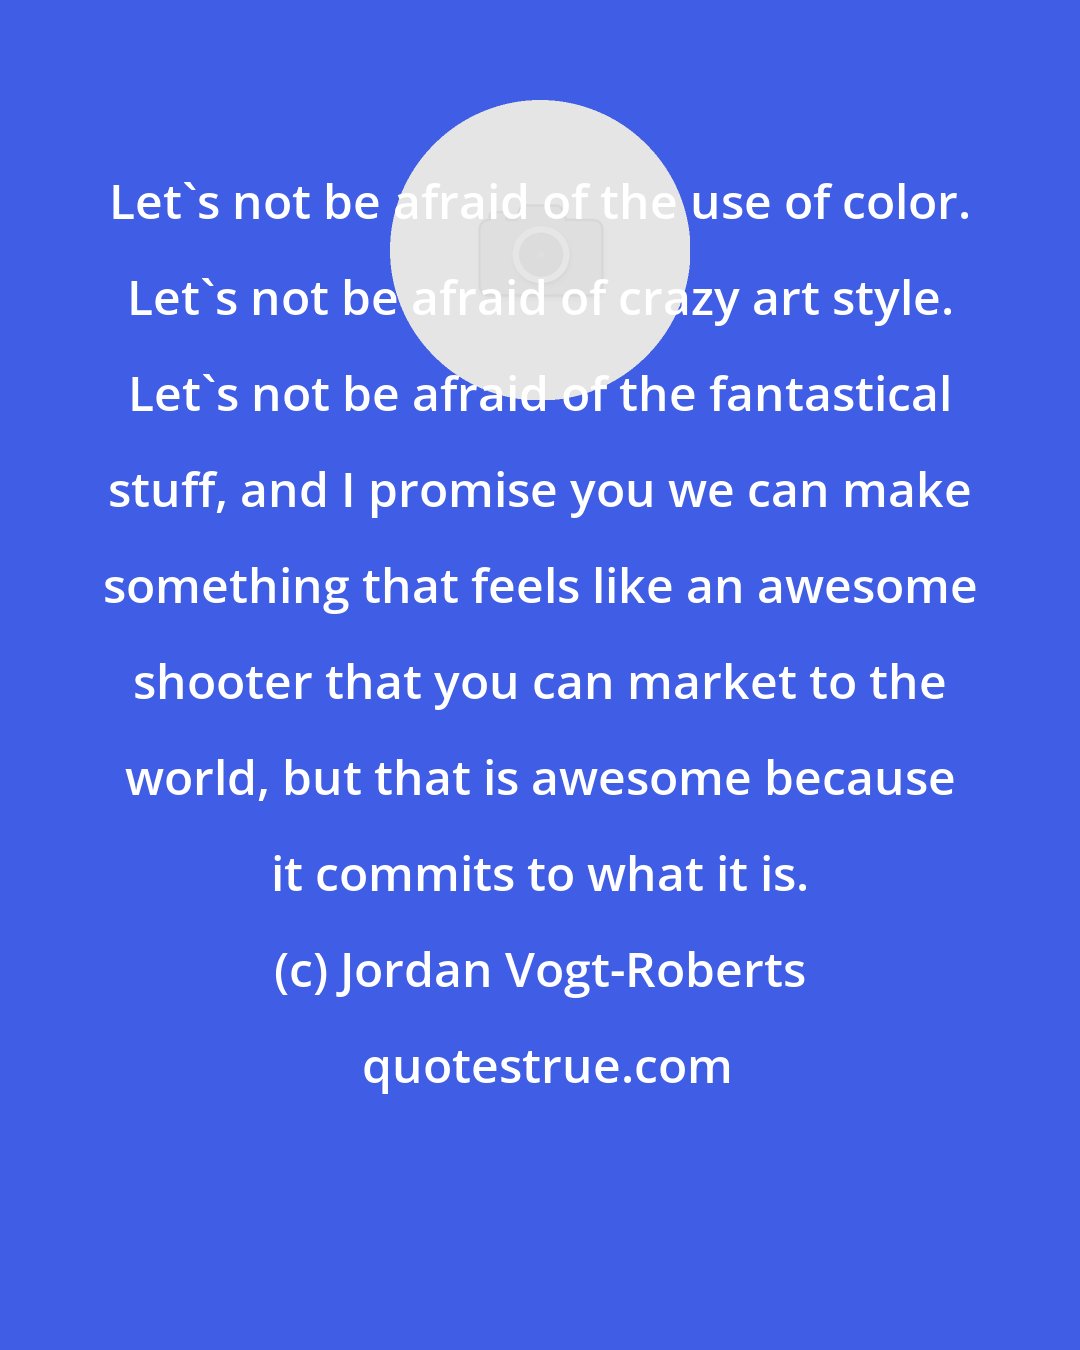 Jordan Vogt-Roberts: Let's not be afraid of the use of color. Let's not be afraid of crazy art style. Let's not be afraid of the fantastical stuff, and I promise you we can make something that feels like an awesome shooter that you can market to the world, but that is awesome because it commits to what it is.